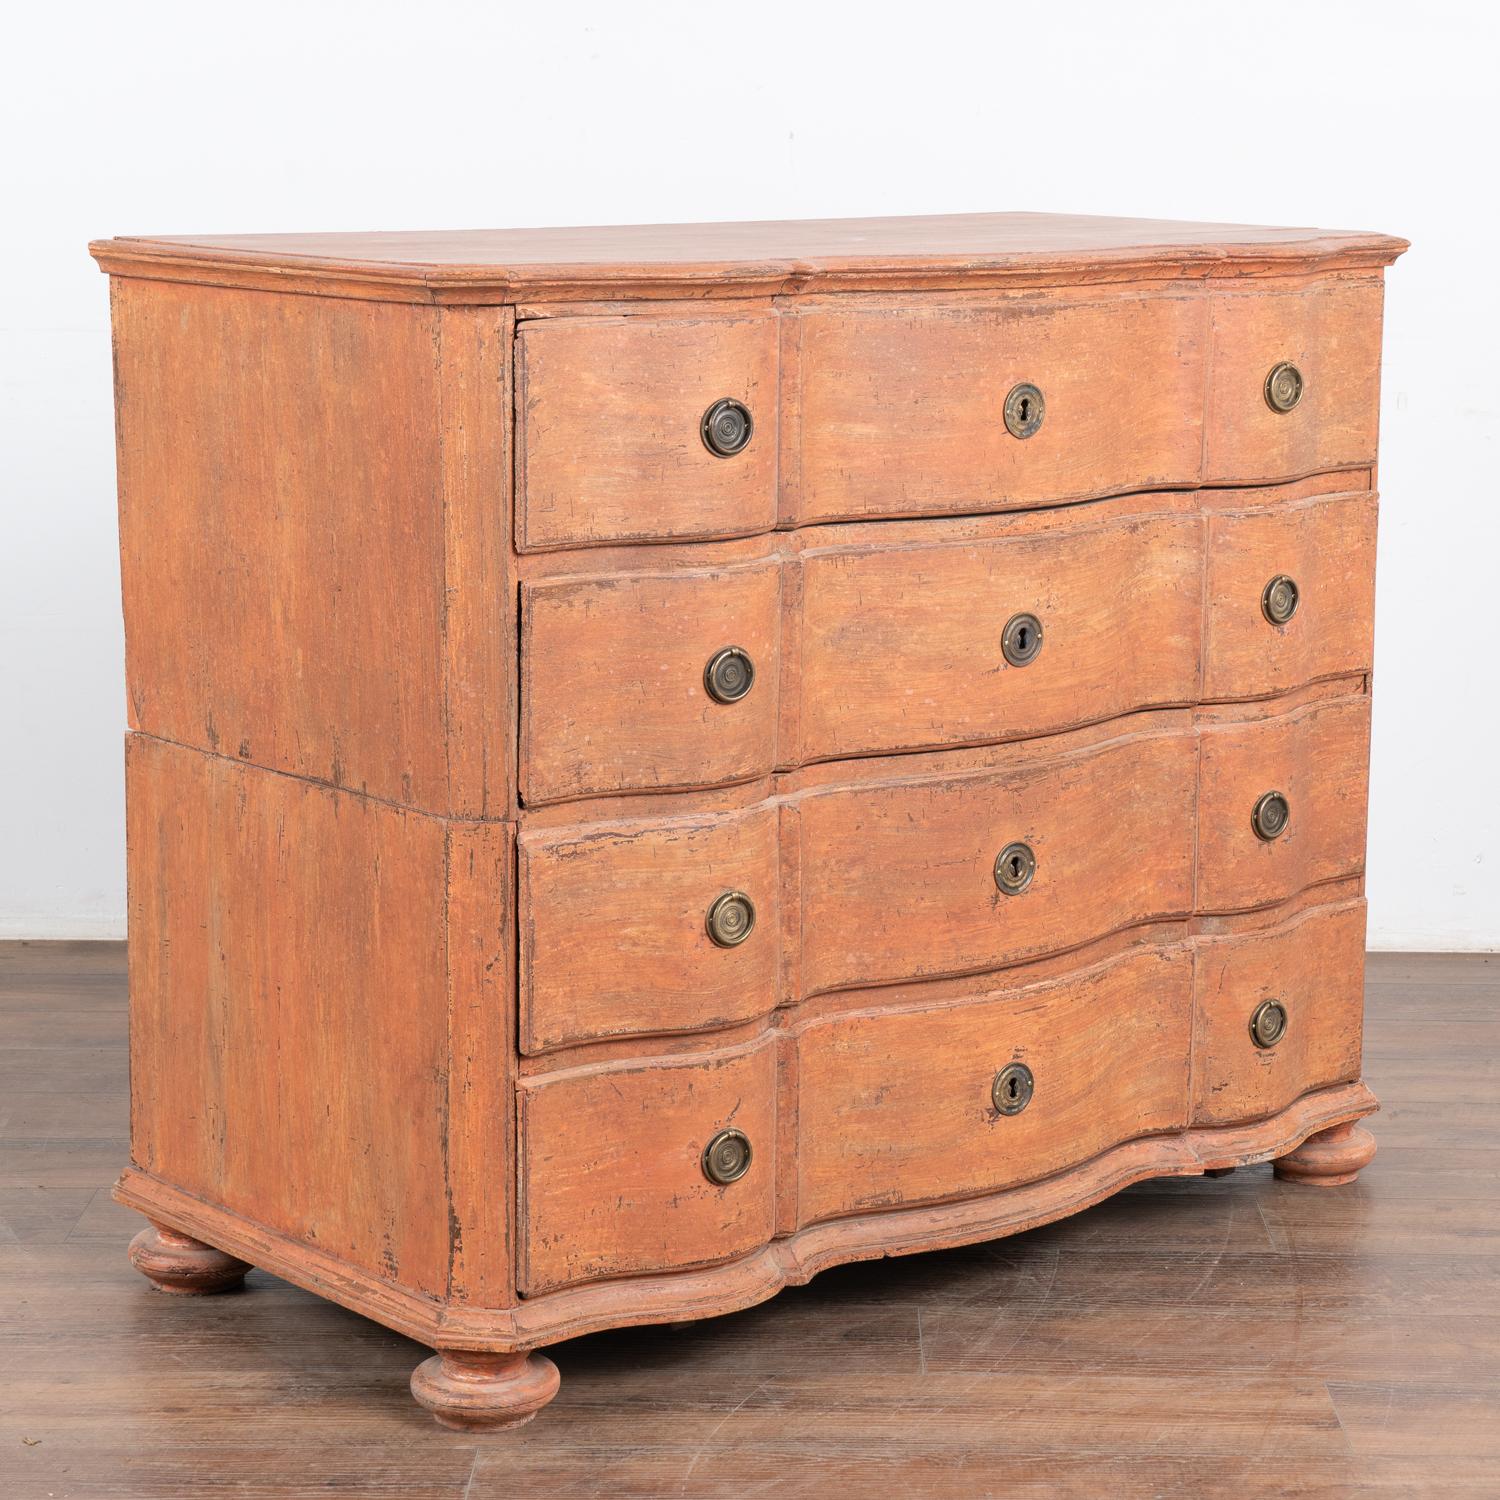 This rococo large oak chest of drawers features a serpentine front, brass hardware pulls and is raised on large bun feet.
The newer, professionally applied and layered salmon painted finish has soft white undertones and is gently distressed,